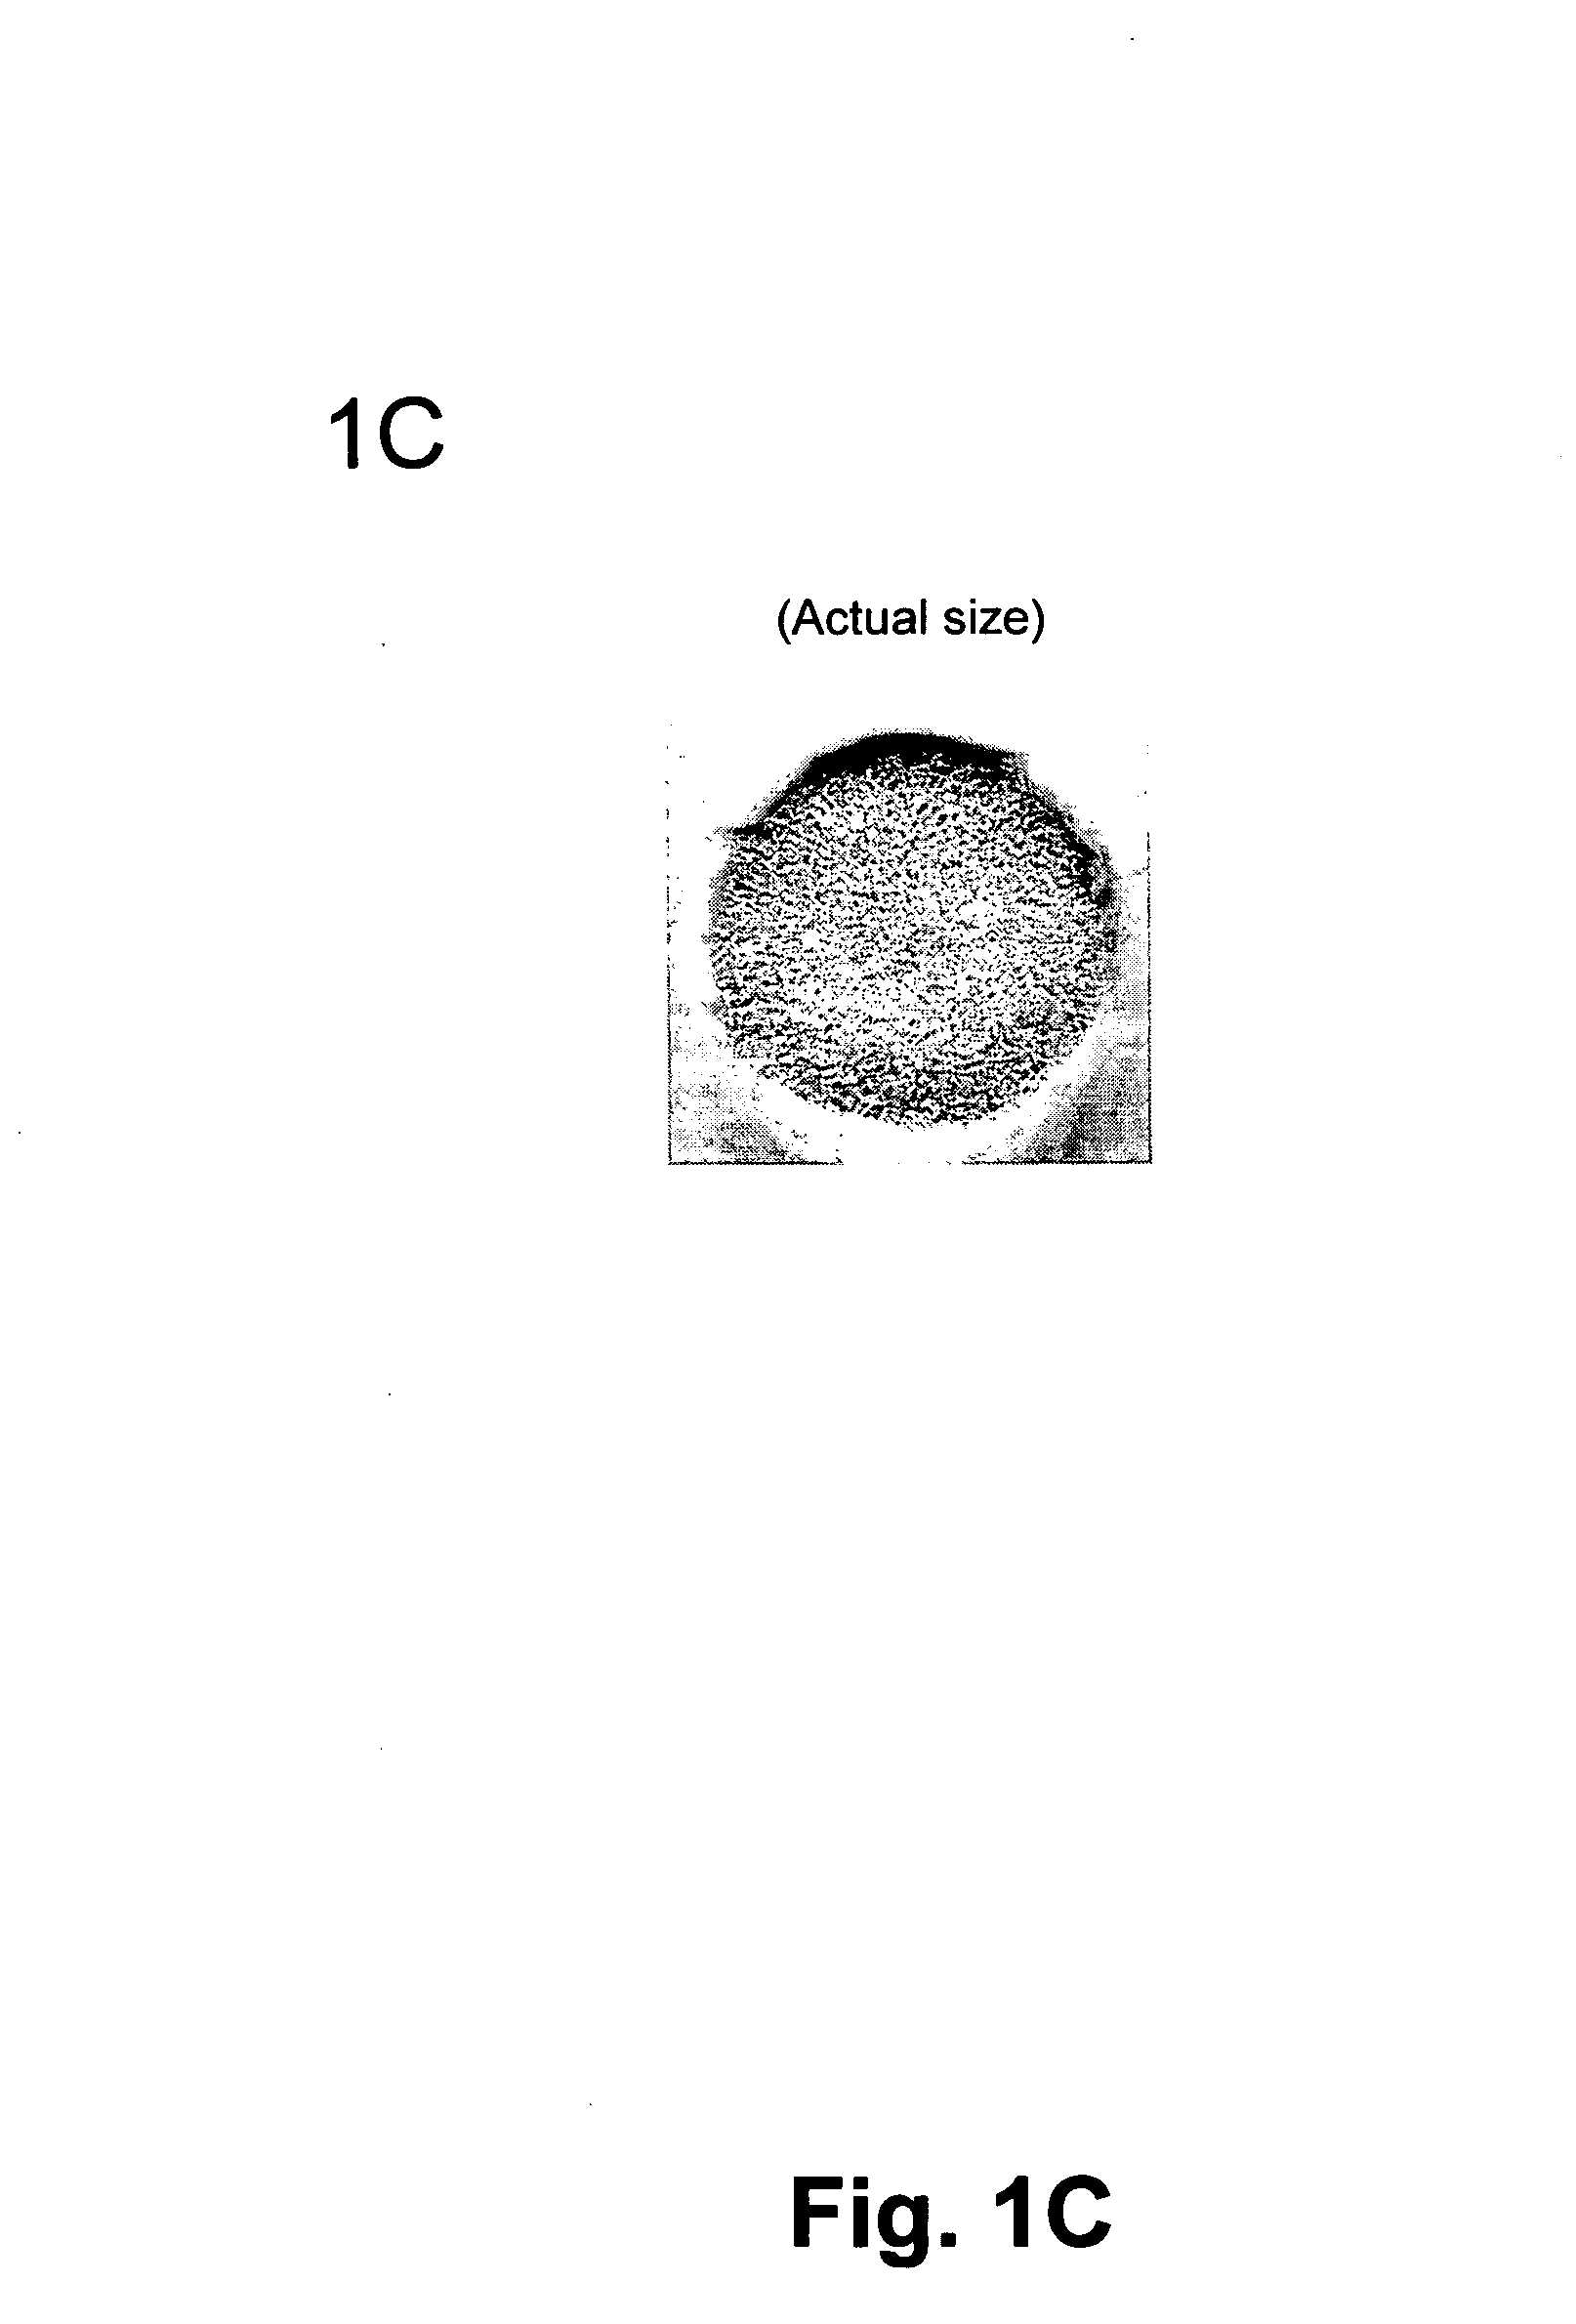 Cell-support matrix having narrowly defined uniformly vertically and non-randomly organized porosity and pore density and a method for preparation thereof